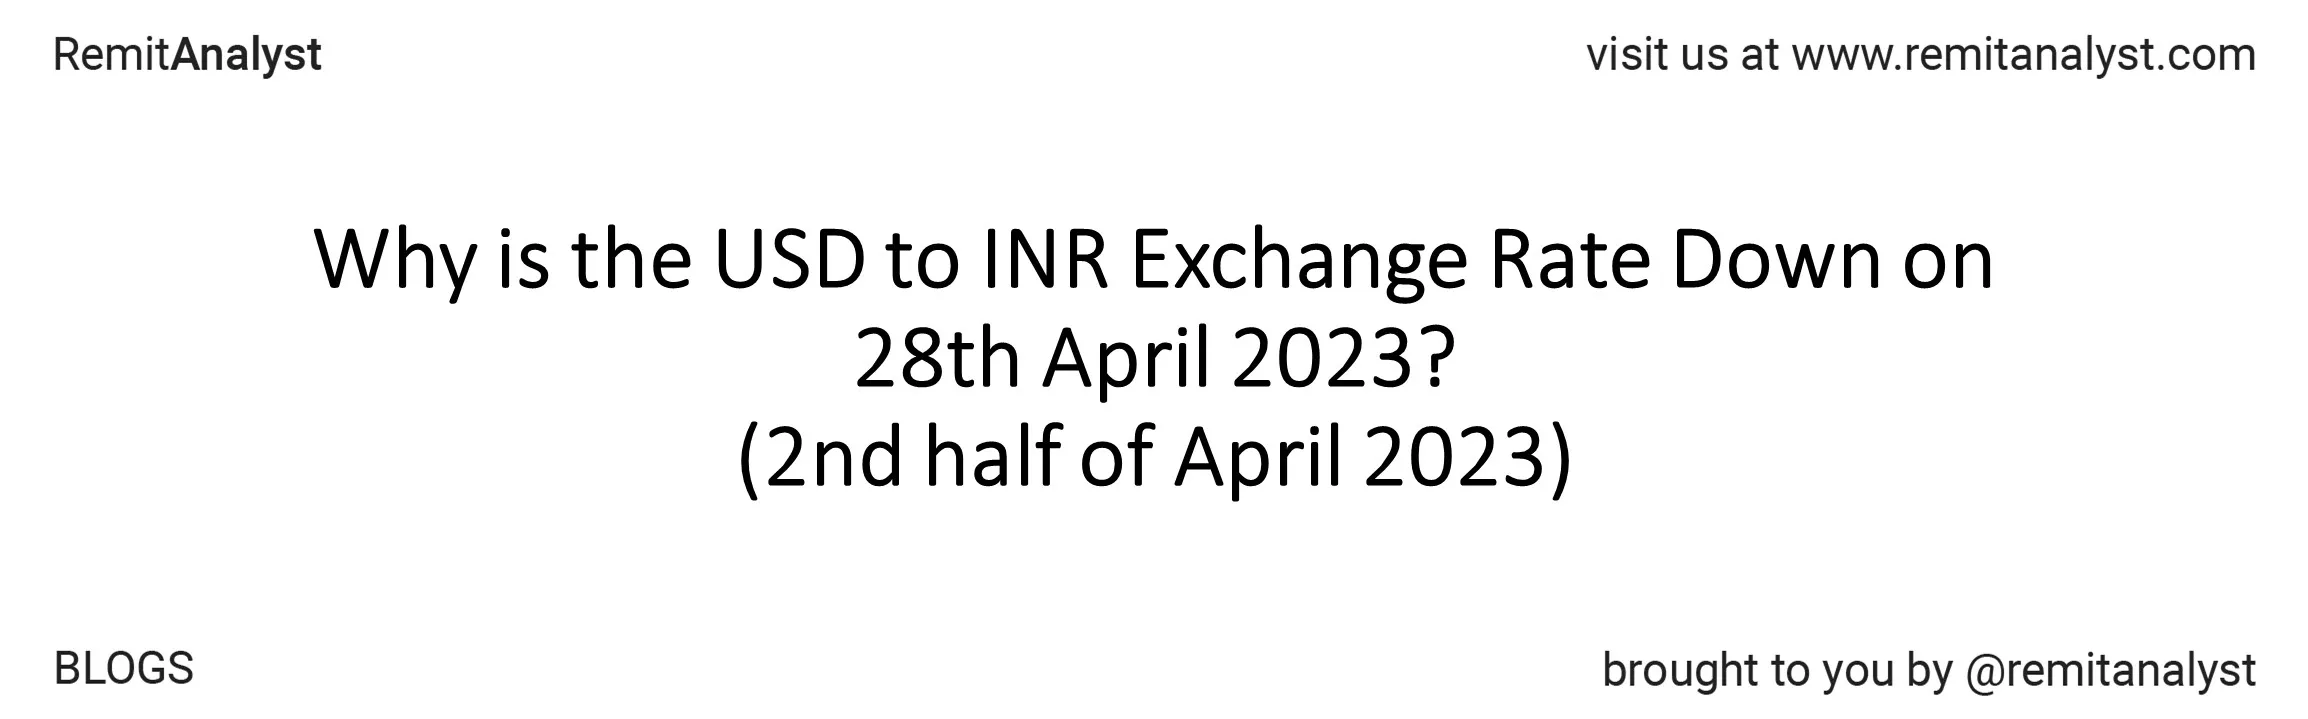 usdtoinrexchangerate17apr2023to28apr2023title